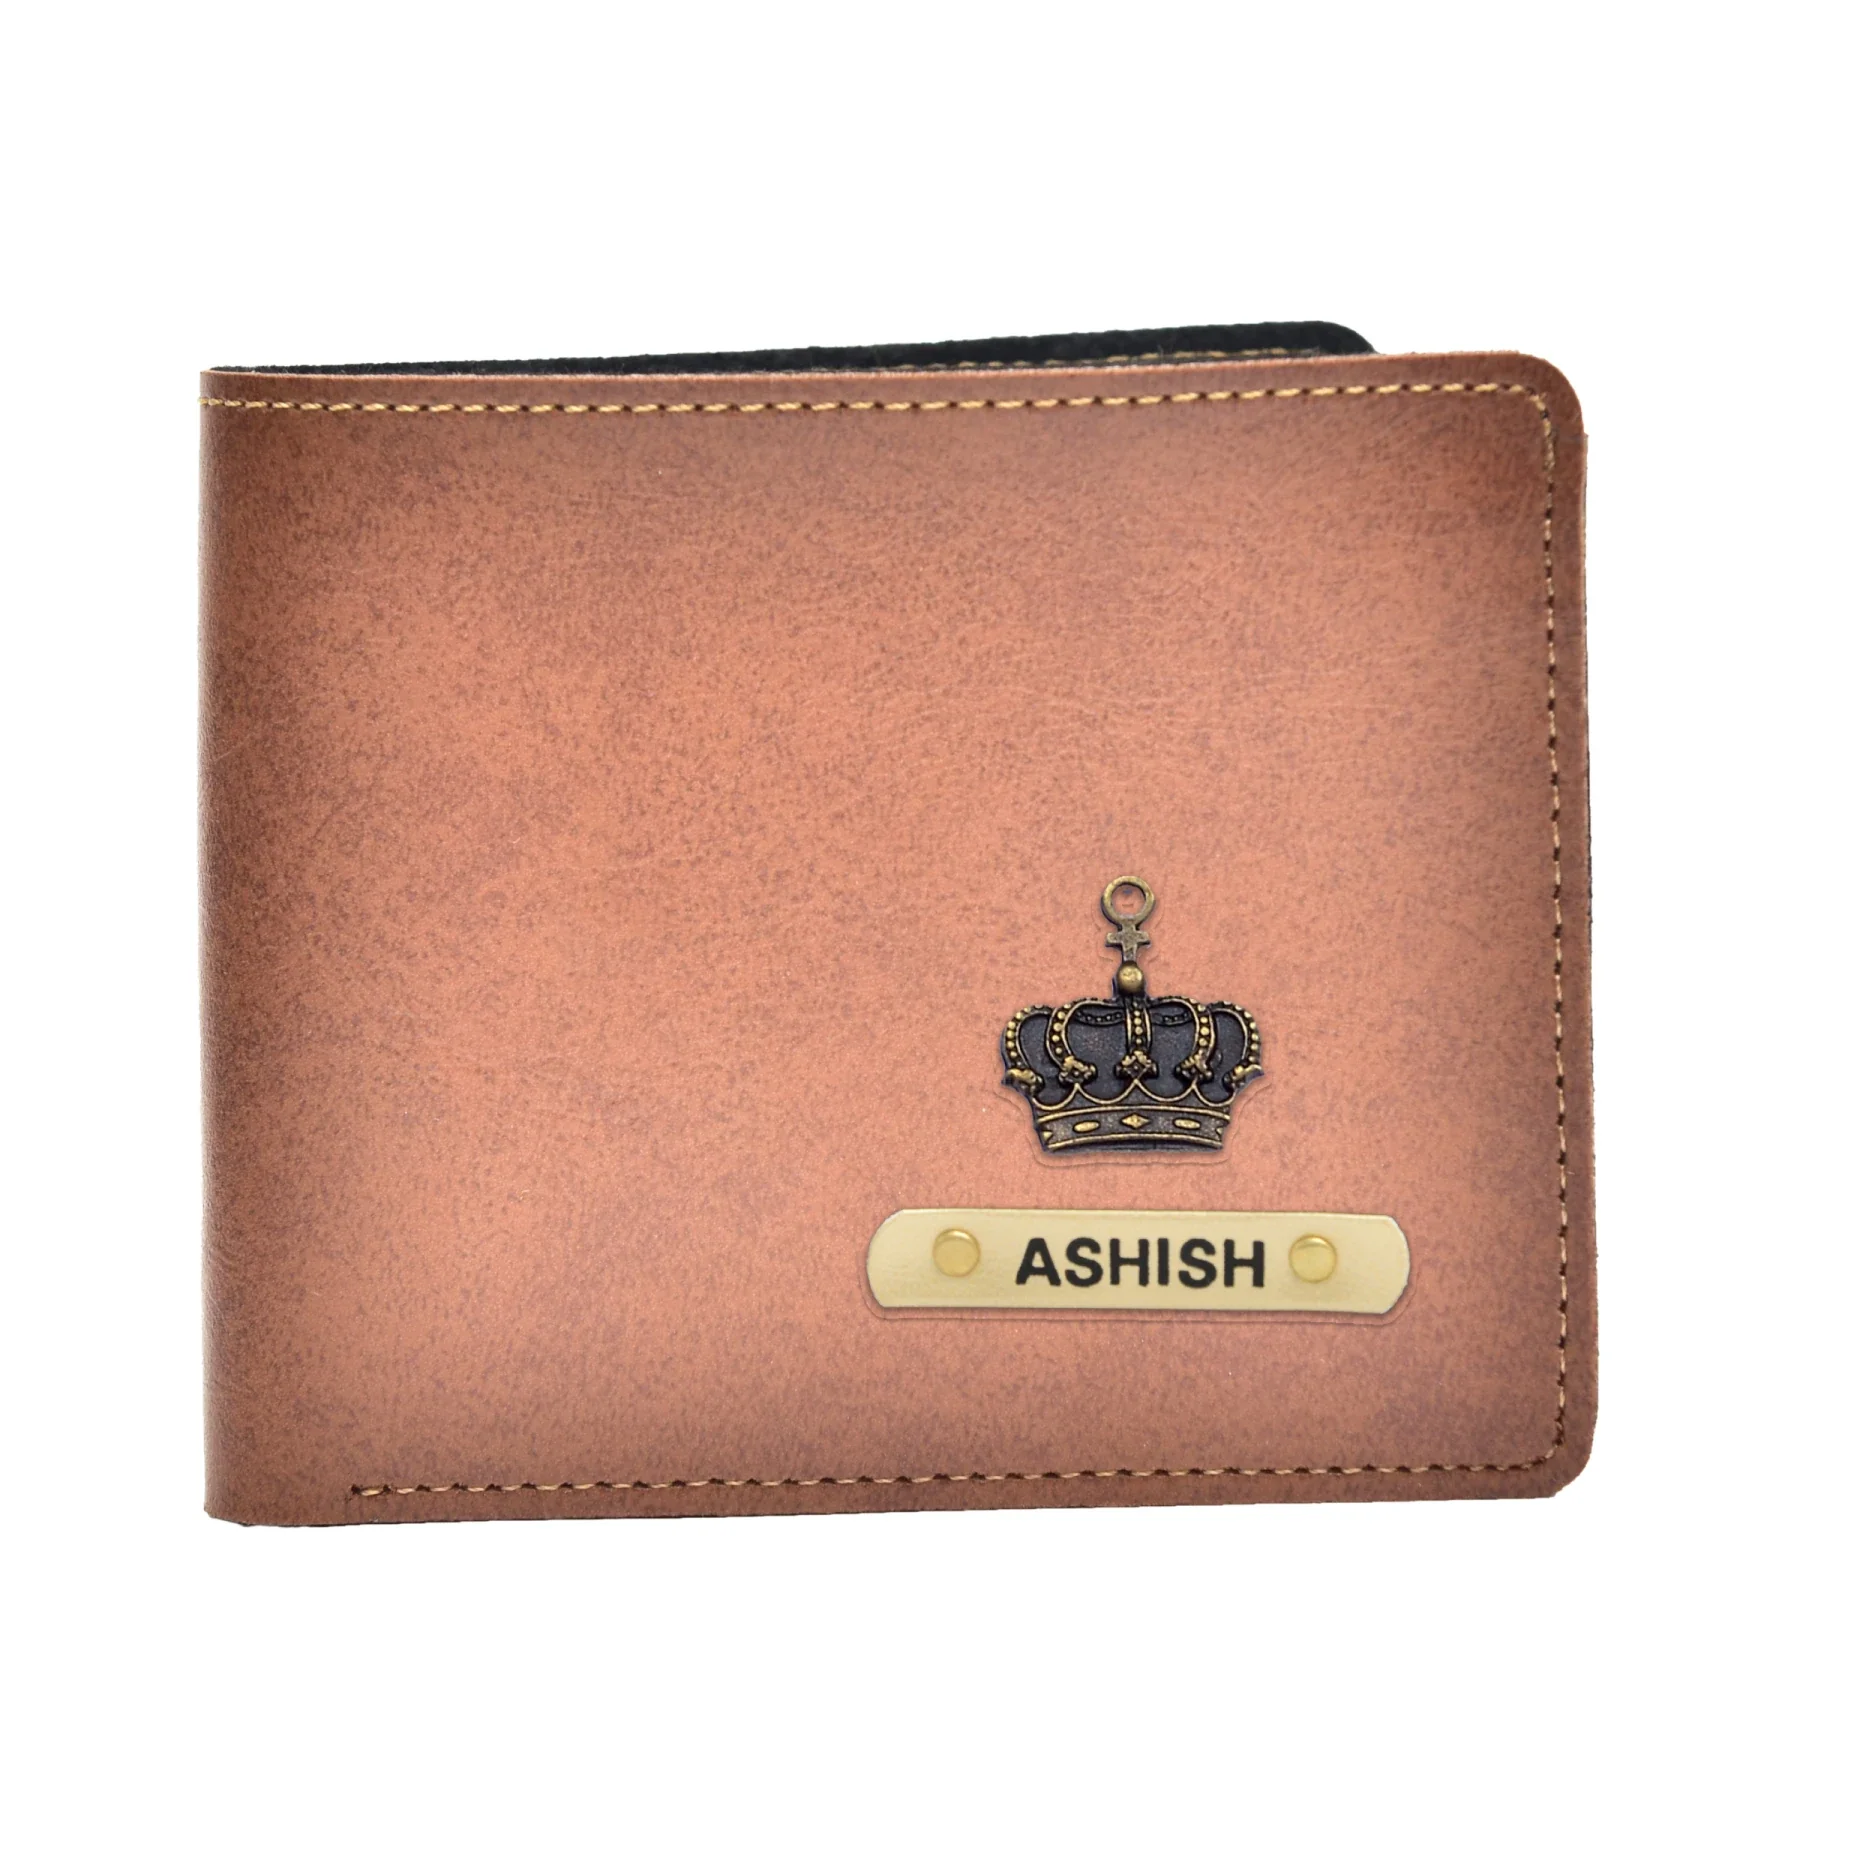 Premium Quality Faux Leather Personalized Men's Wallet with name and charm